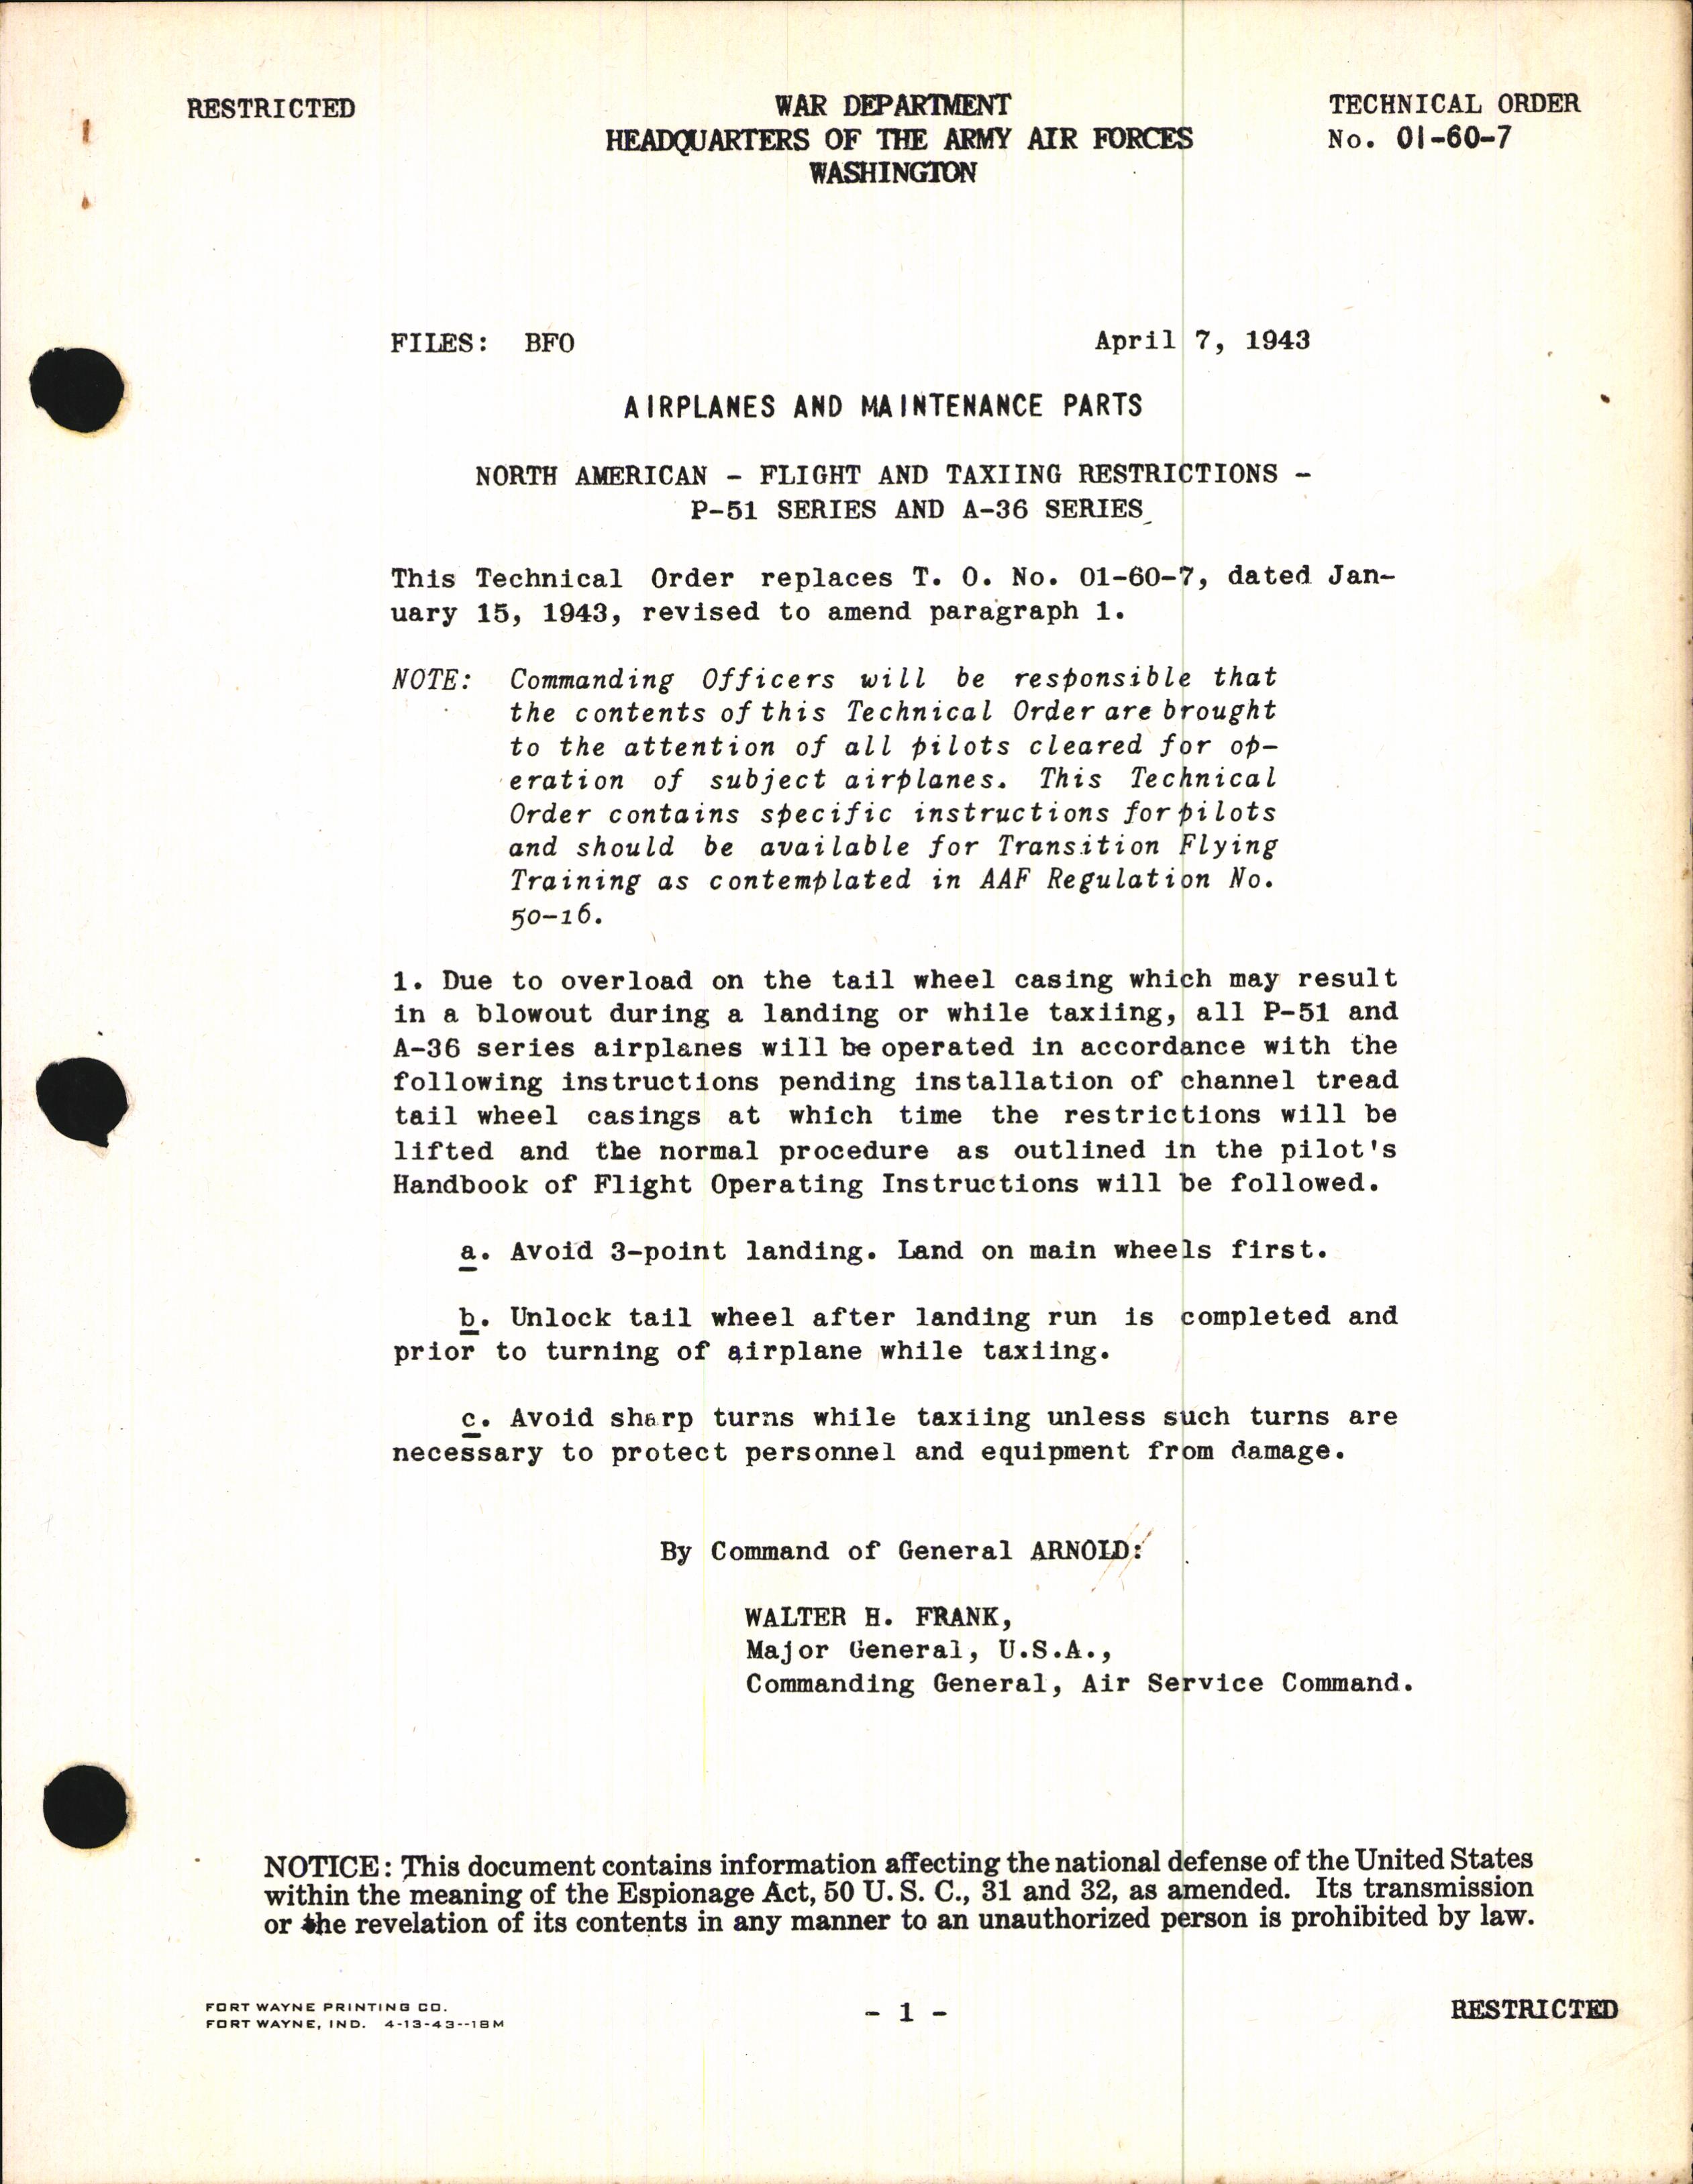 Sample page 1 from AirCorps Library document: Flight and Taxiing Restrictions for P-51 and A-36 Series